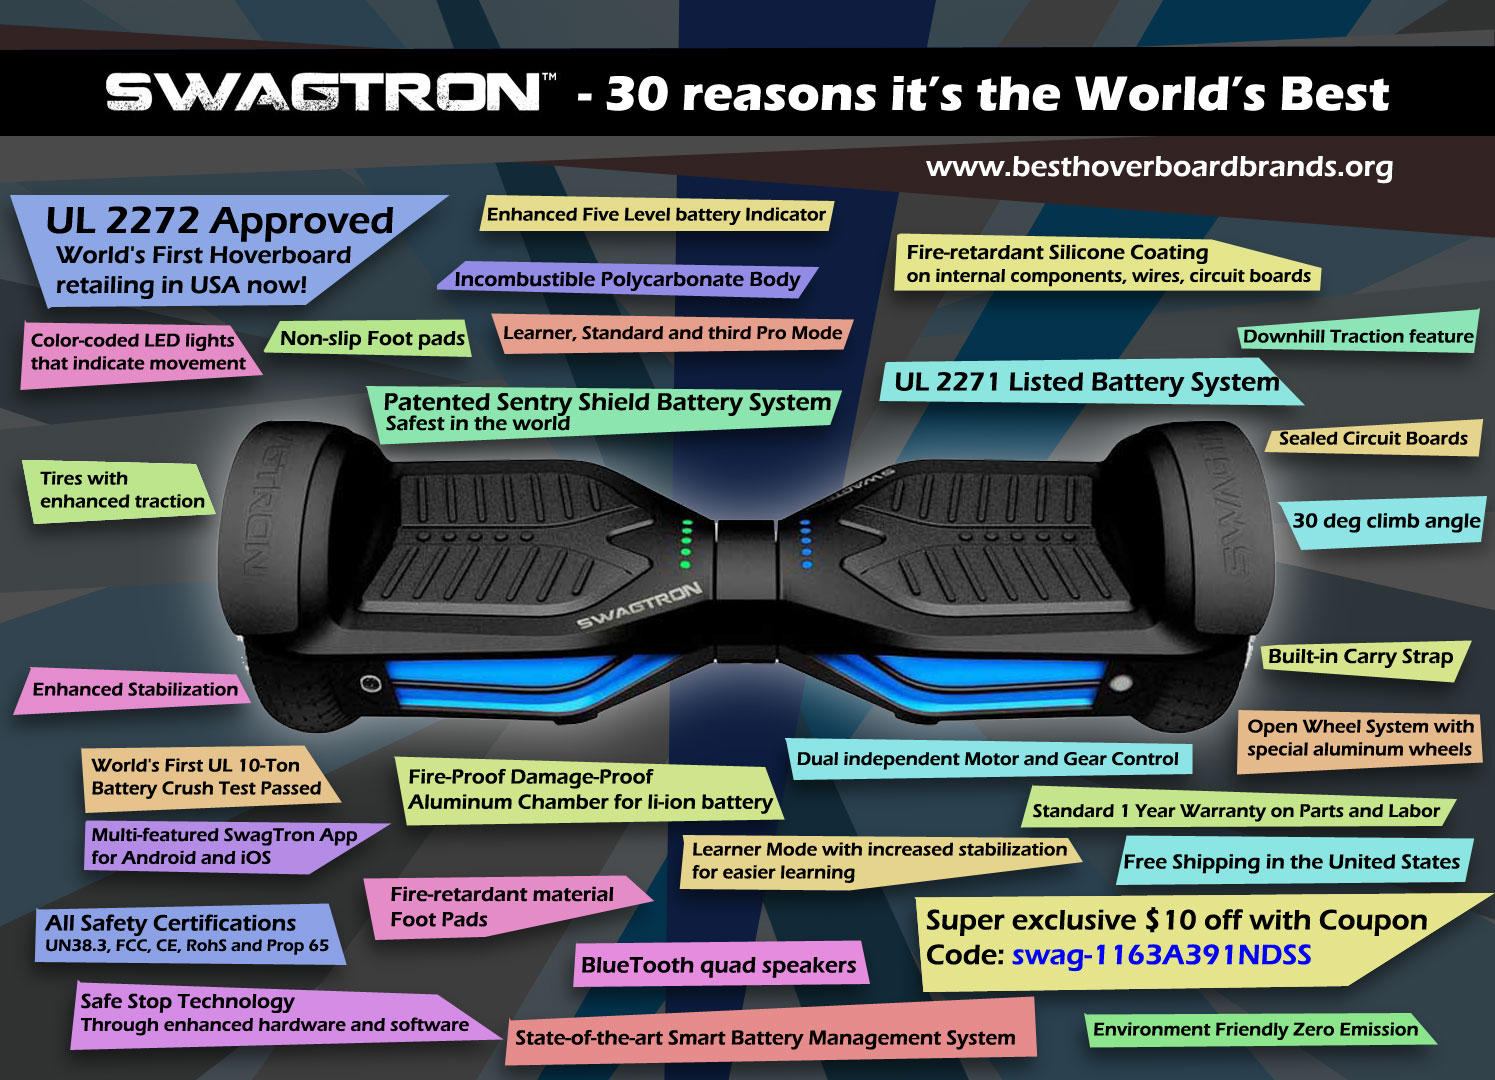 SwagTron-Infographic-30-reasons-world-best-world-first-UL-2272-SwagTron-T3